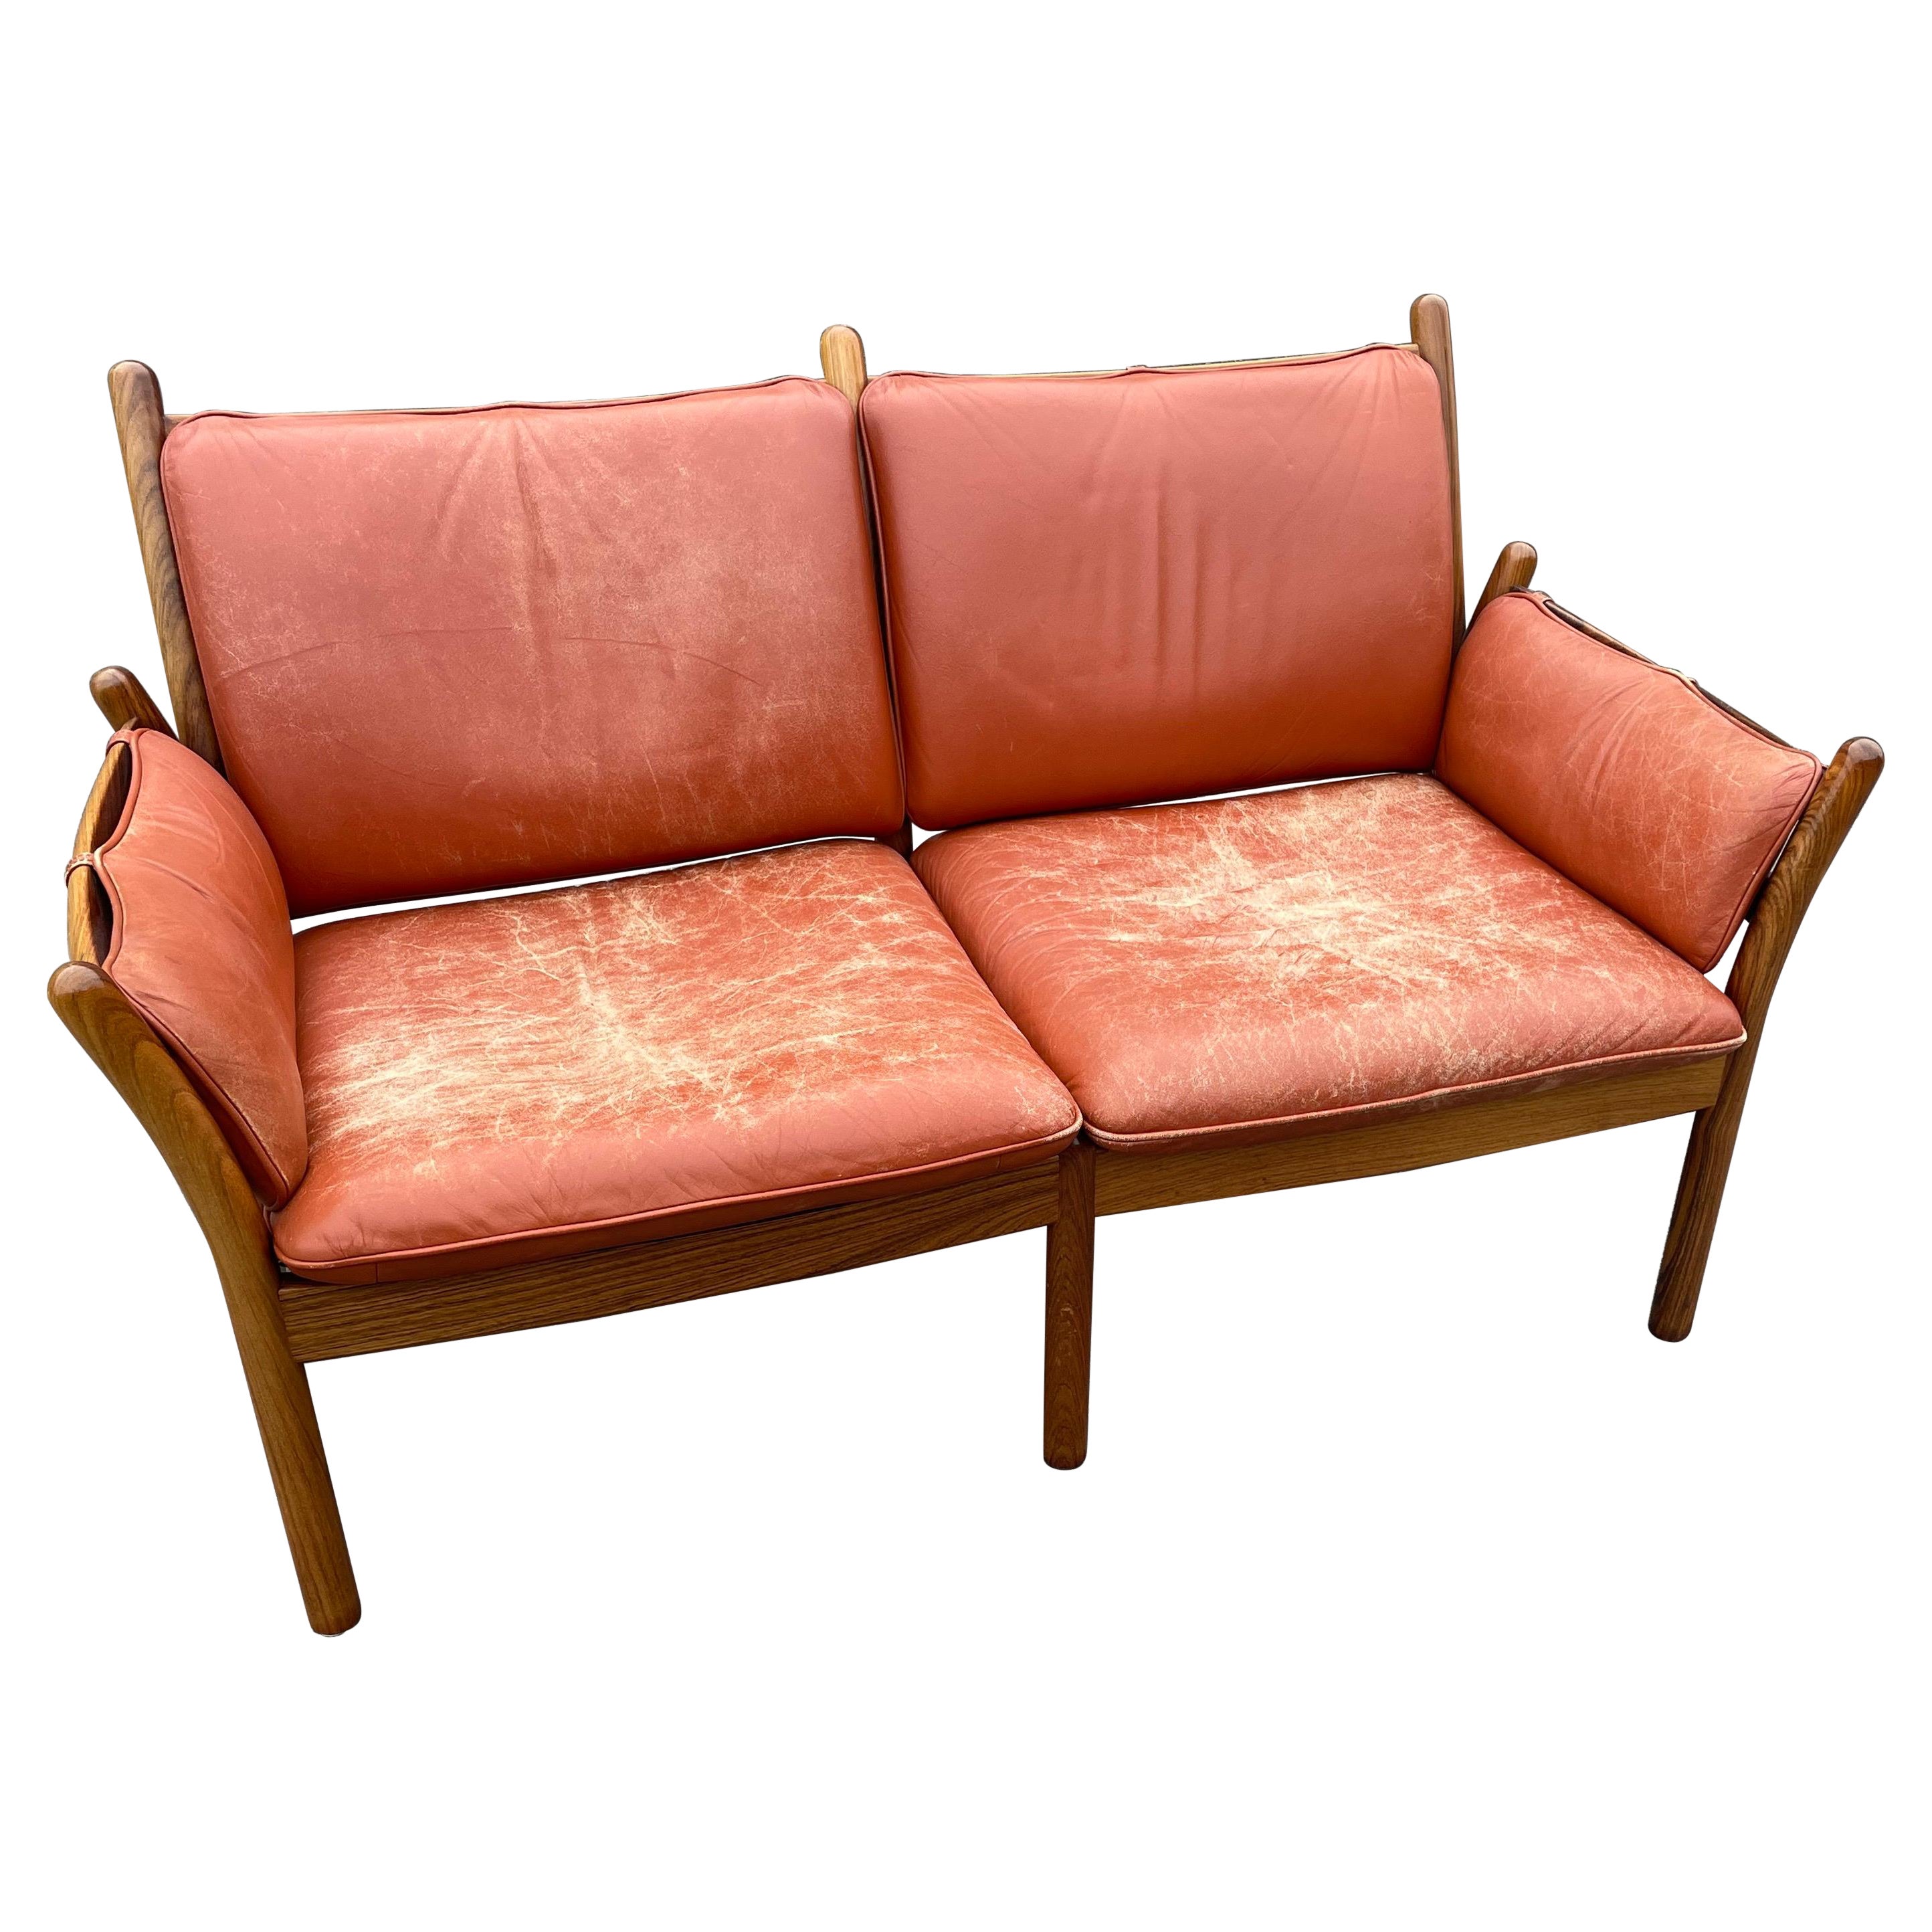 Midcentury Danish Rosewood and Leather Sofa by Illum Wikkelsø for CFC Silkeborg